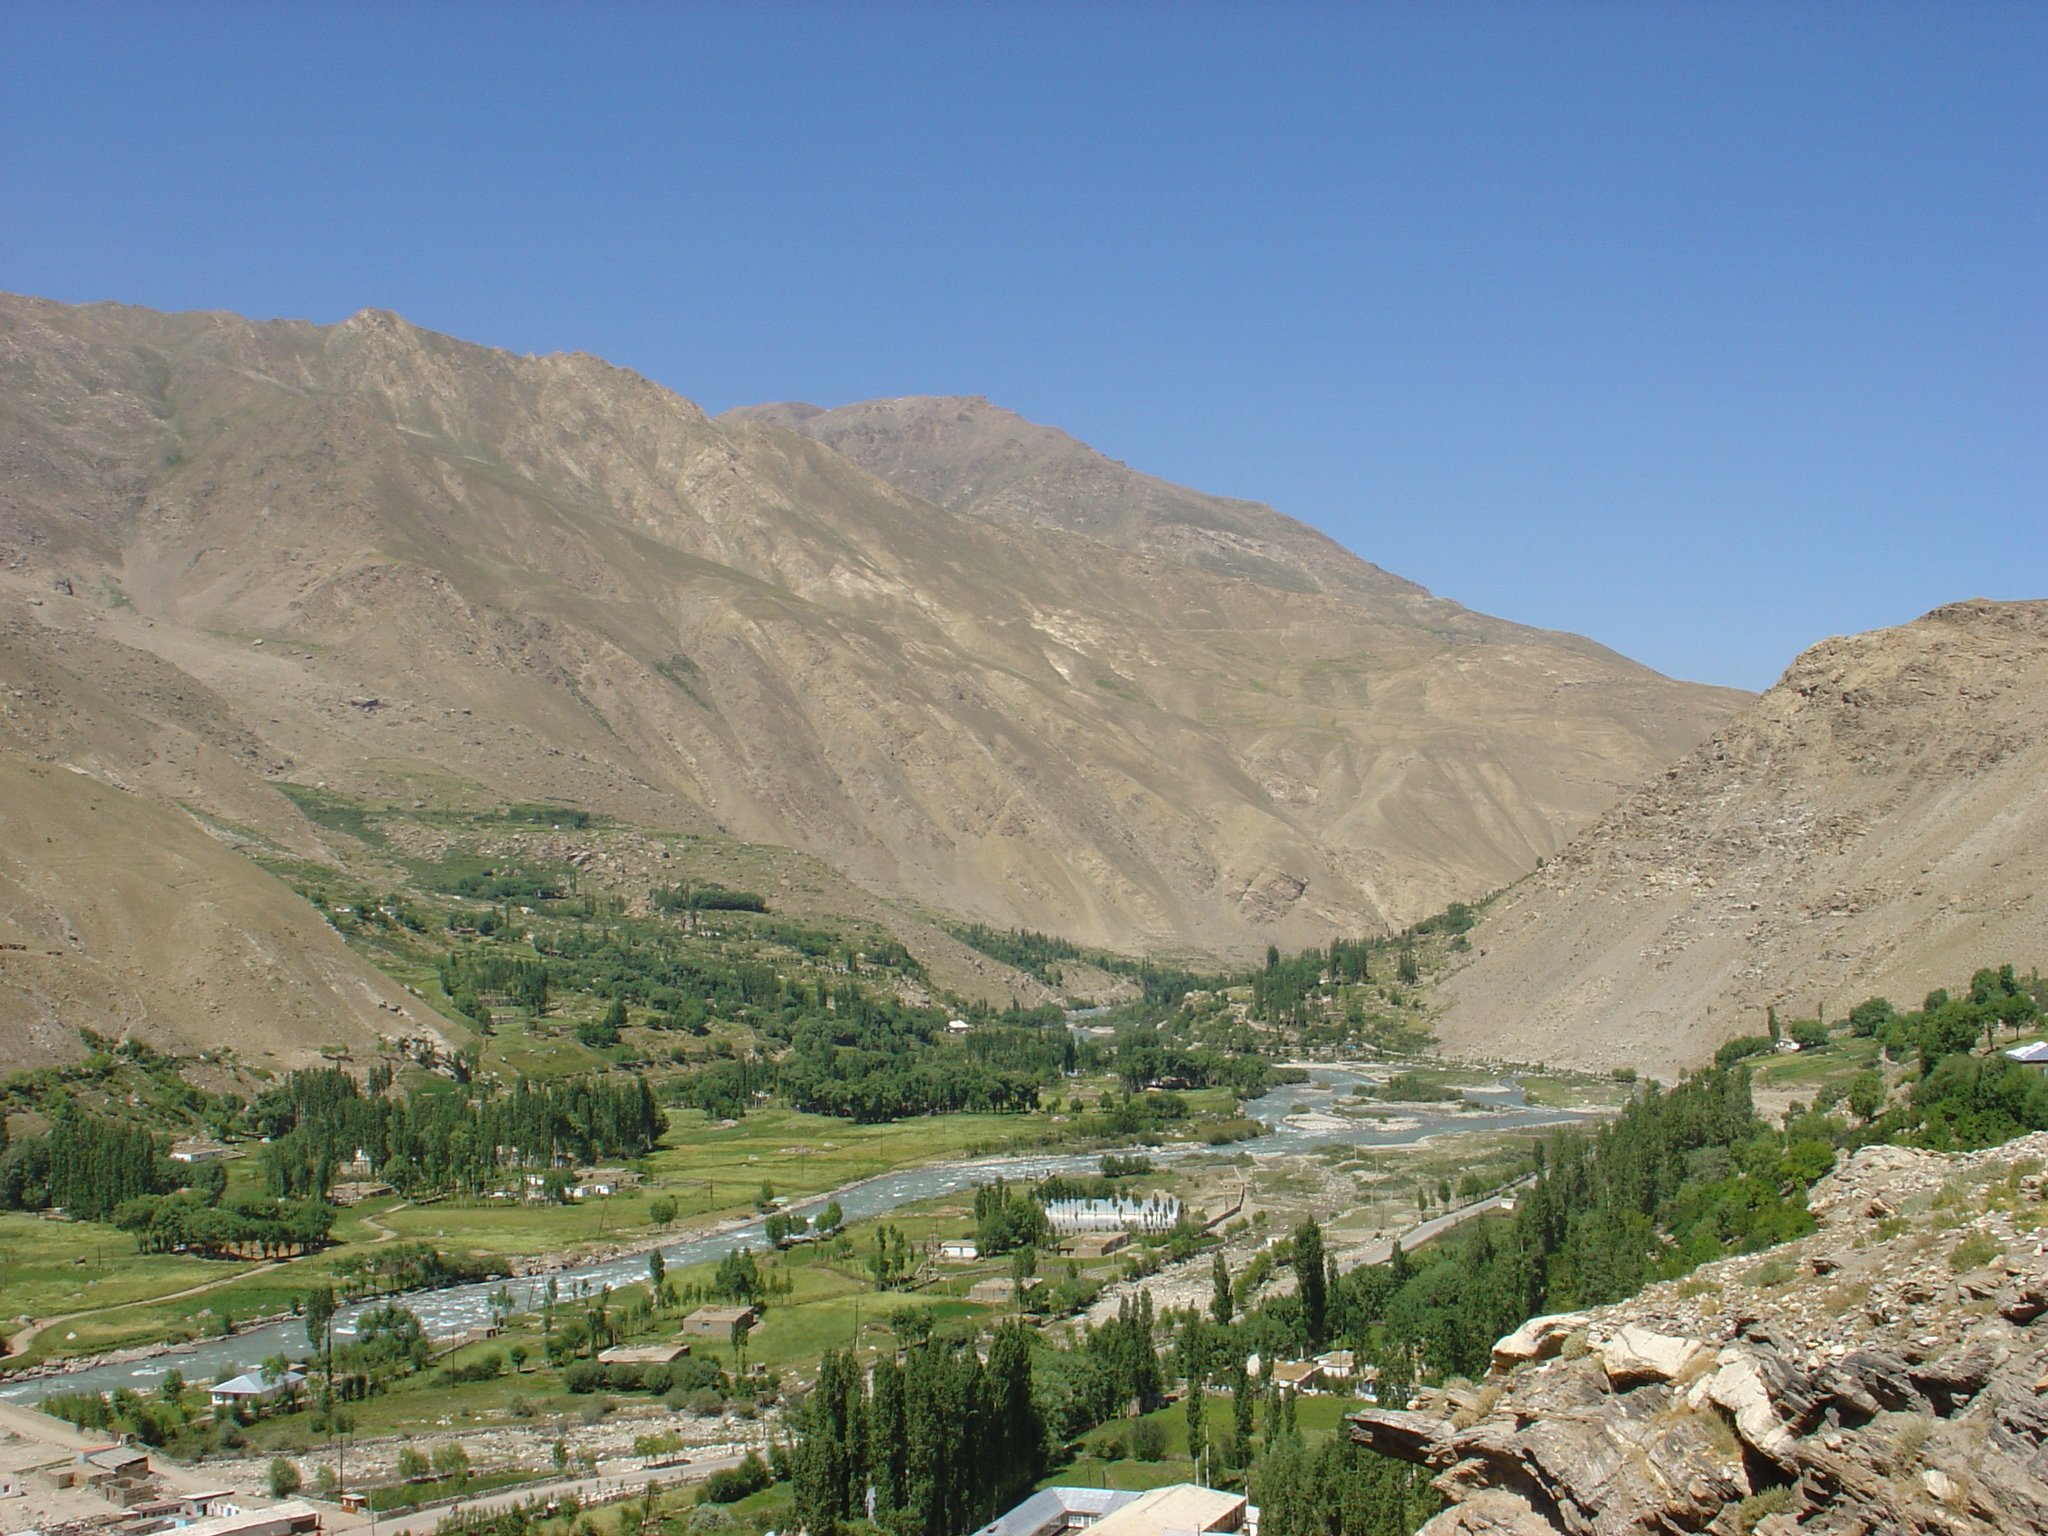 River in valley surrounded by mountains